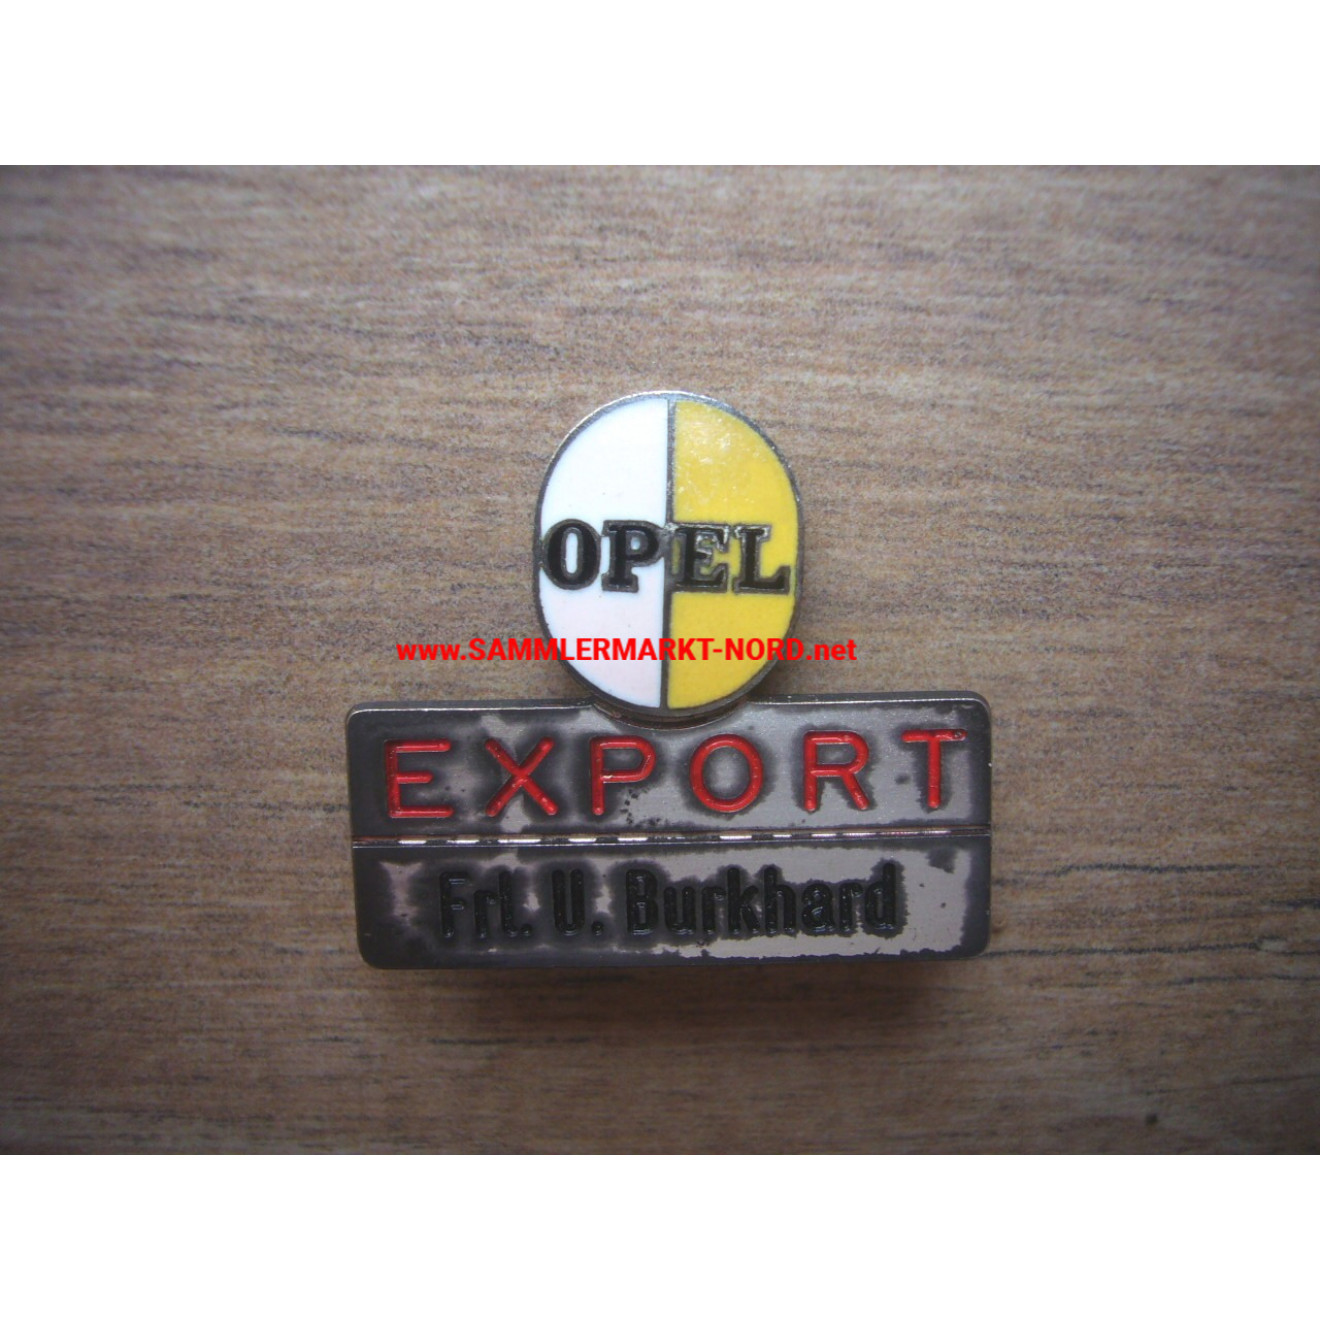 Adam OPEL AG, Automobiles - Name badge for an employee in the export department